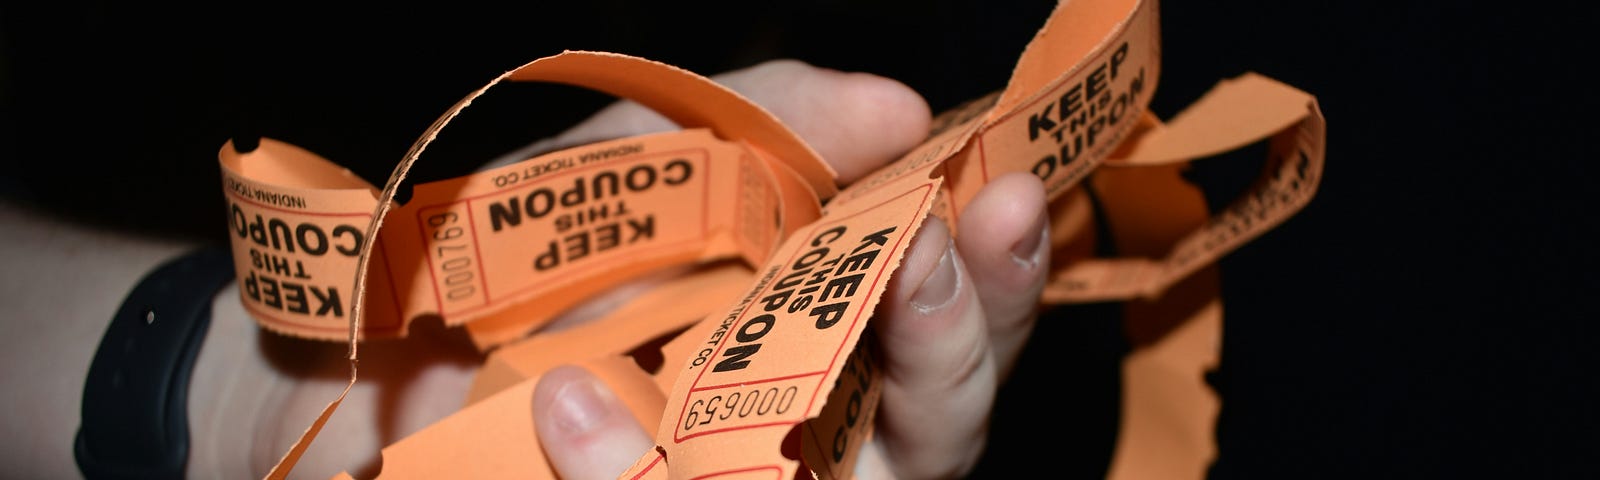 Picture of Tickets for a drawing.